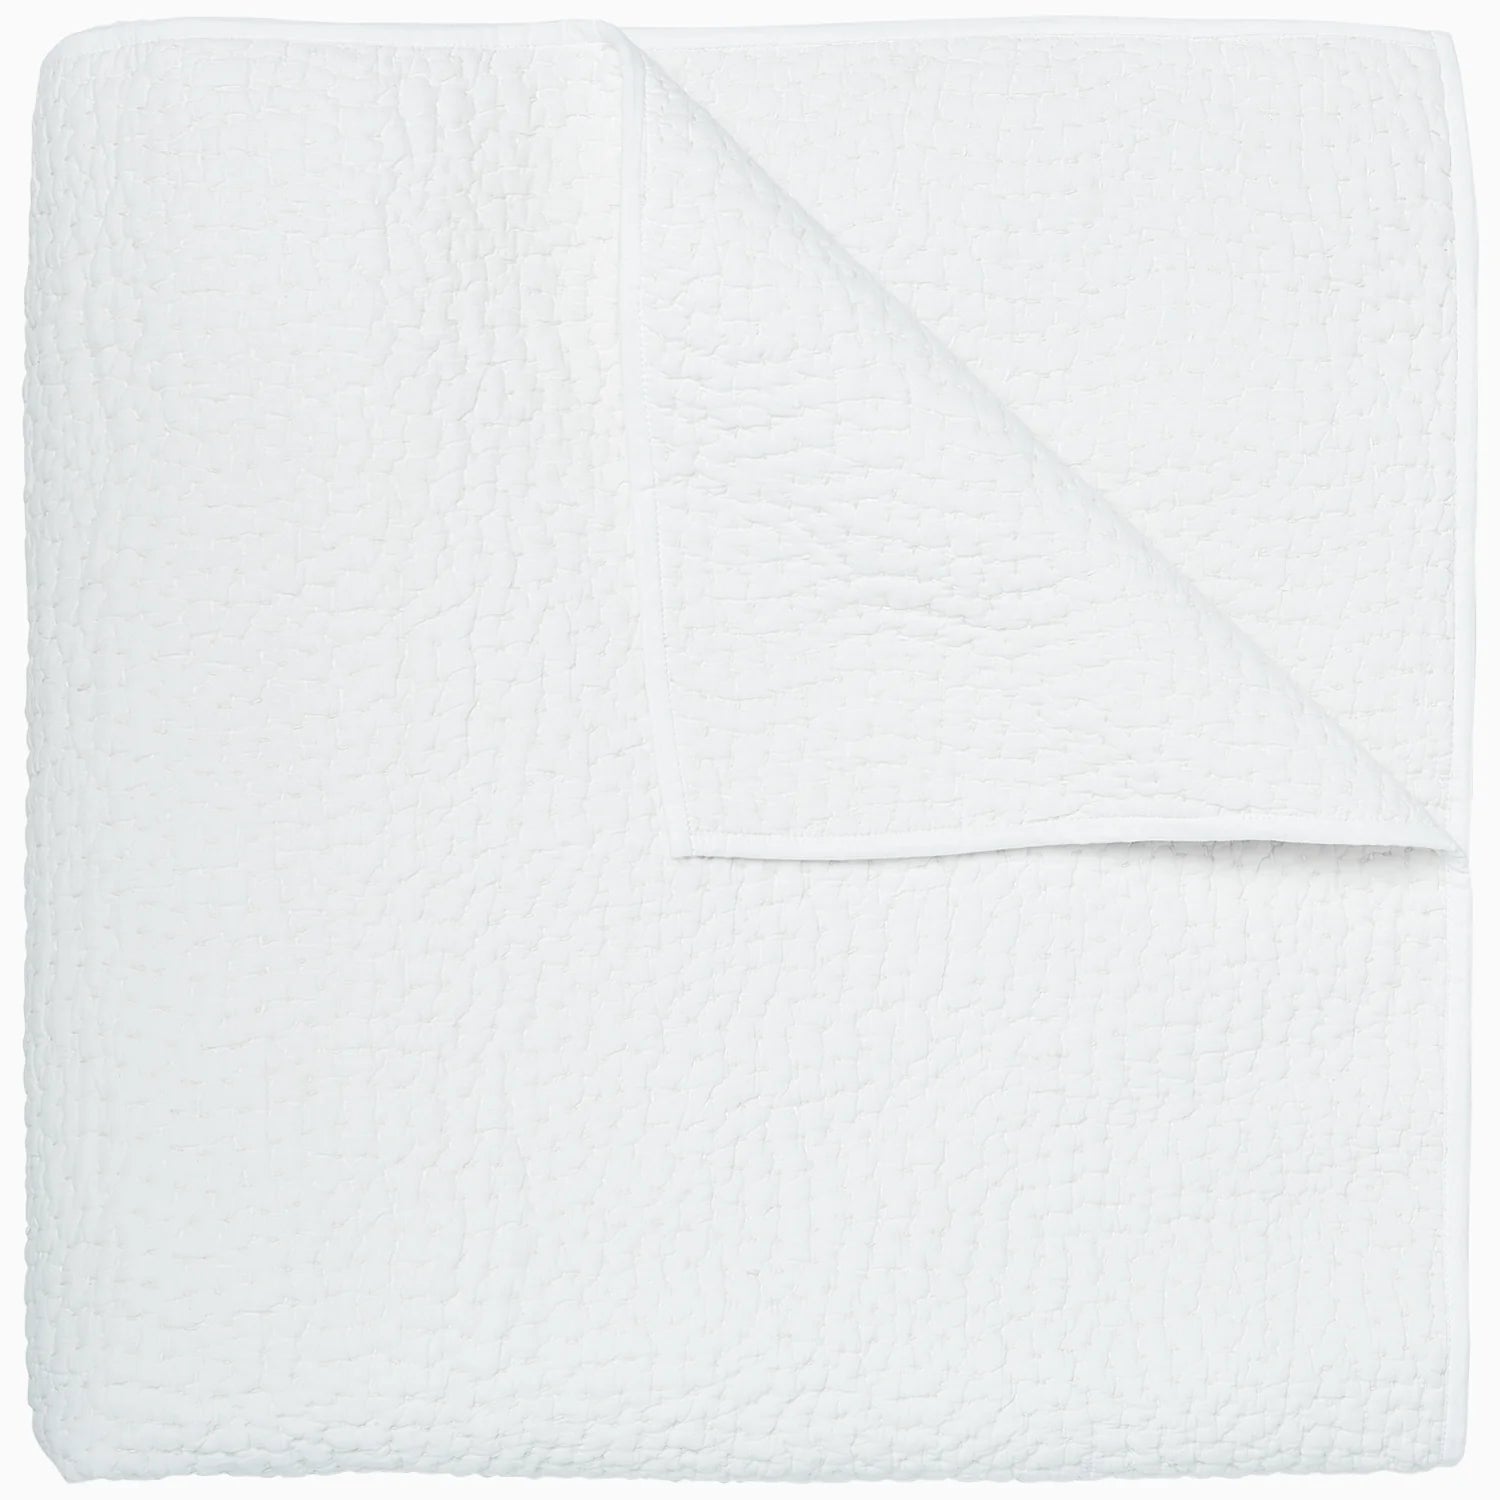 A plain white textured blanket neatly folded over in a Scottsdale Arizona bungalow, displaying a smooth and soft quilted pattern.